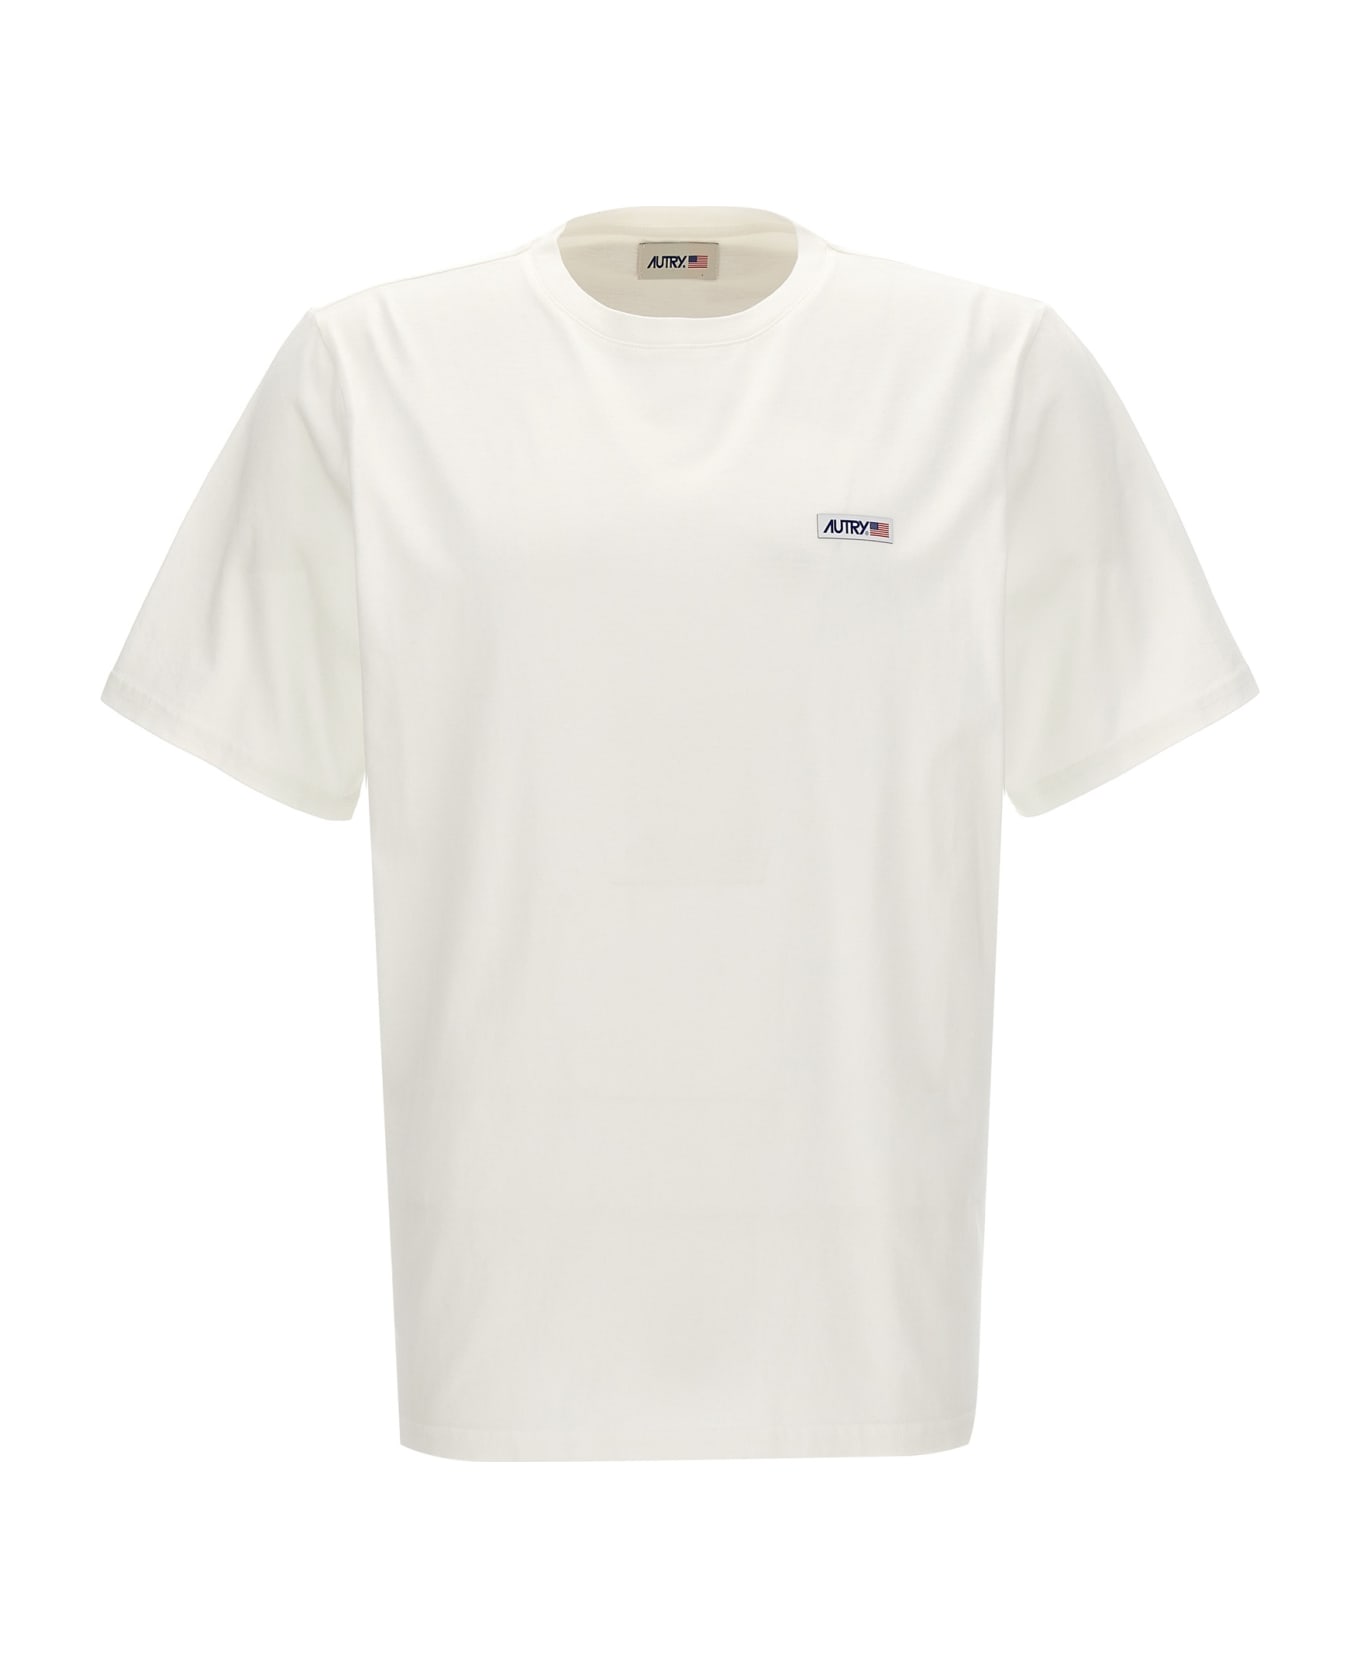 Autry Cotton T-shirt With Logo - White